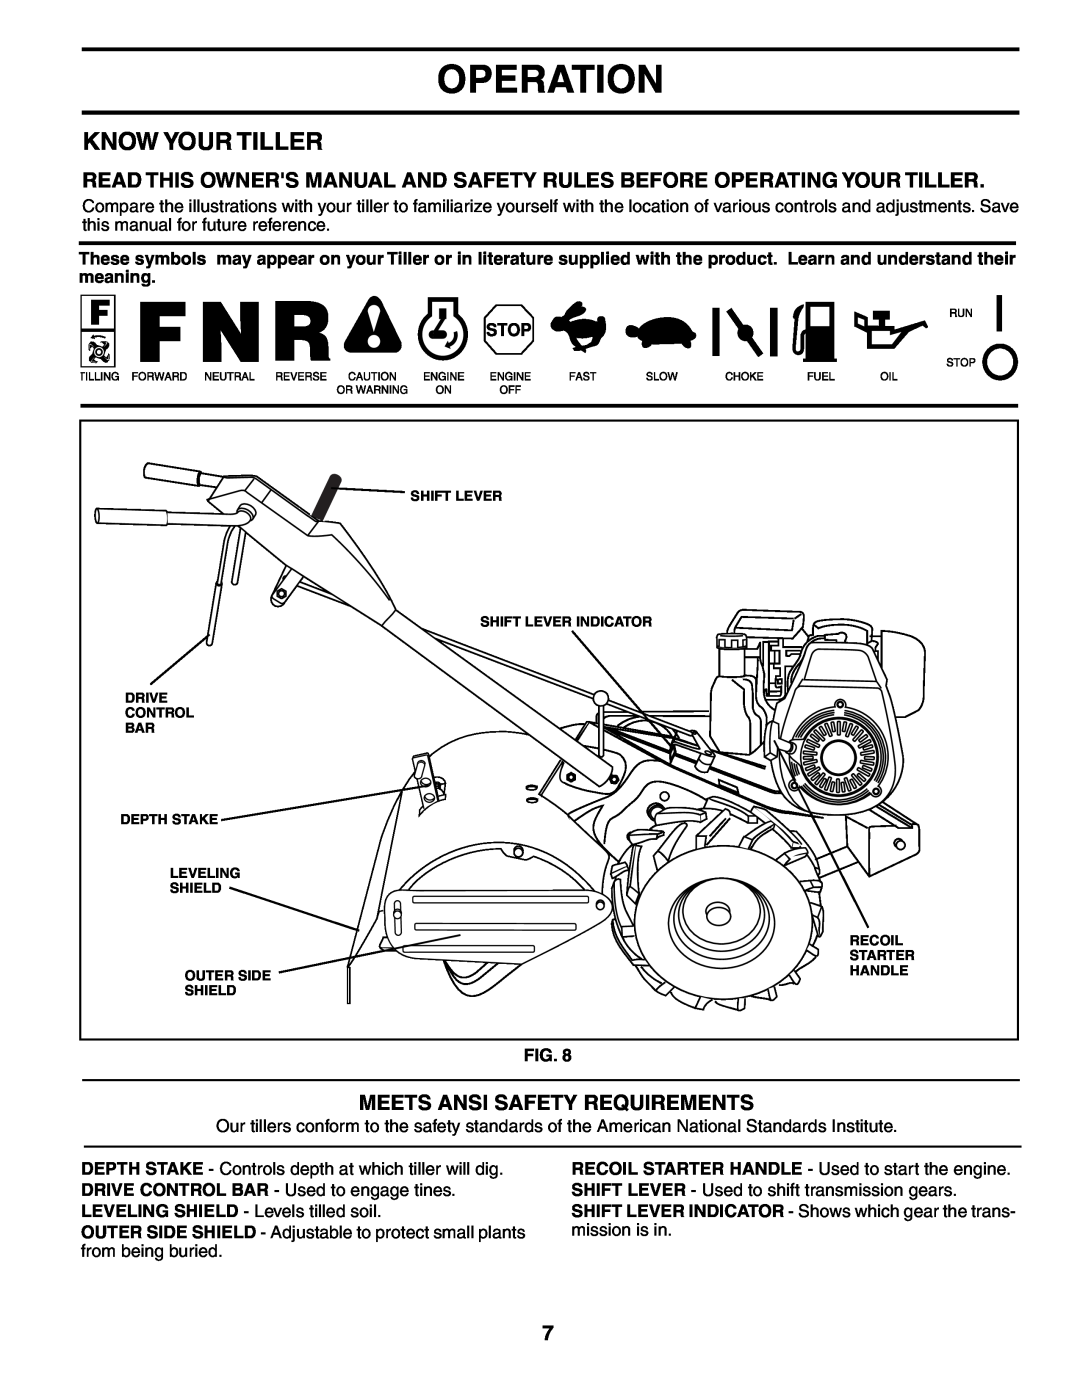 Husqvarna 500RTT owner manual Operation, Know Your Tiller, Meets Ansi Safety Requirements, Fig 